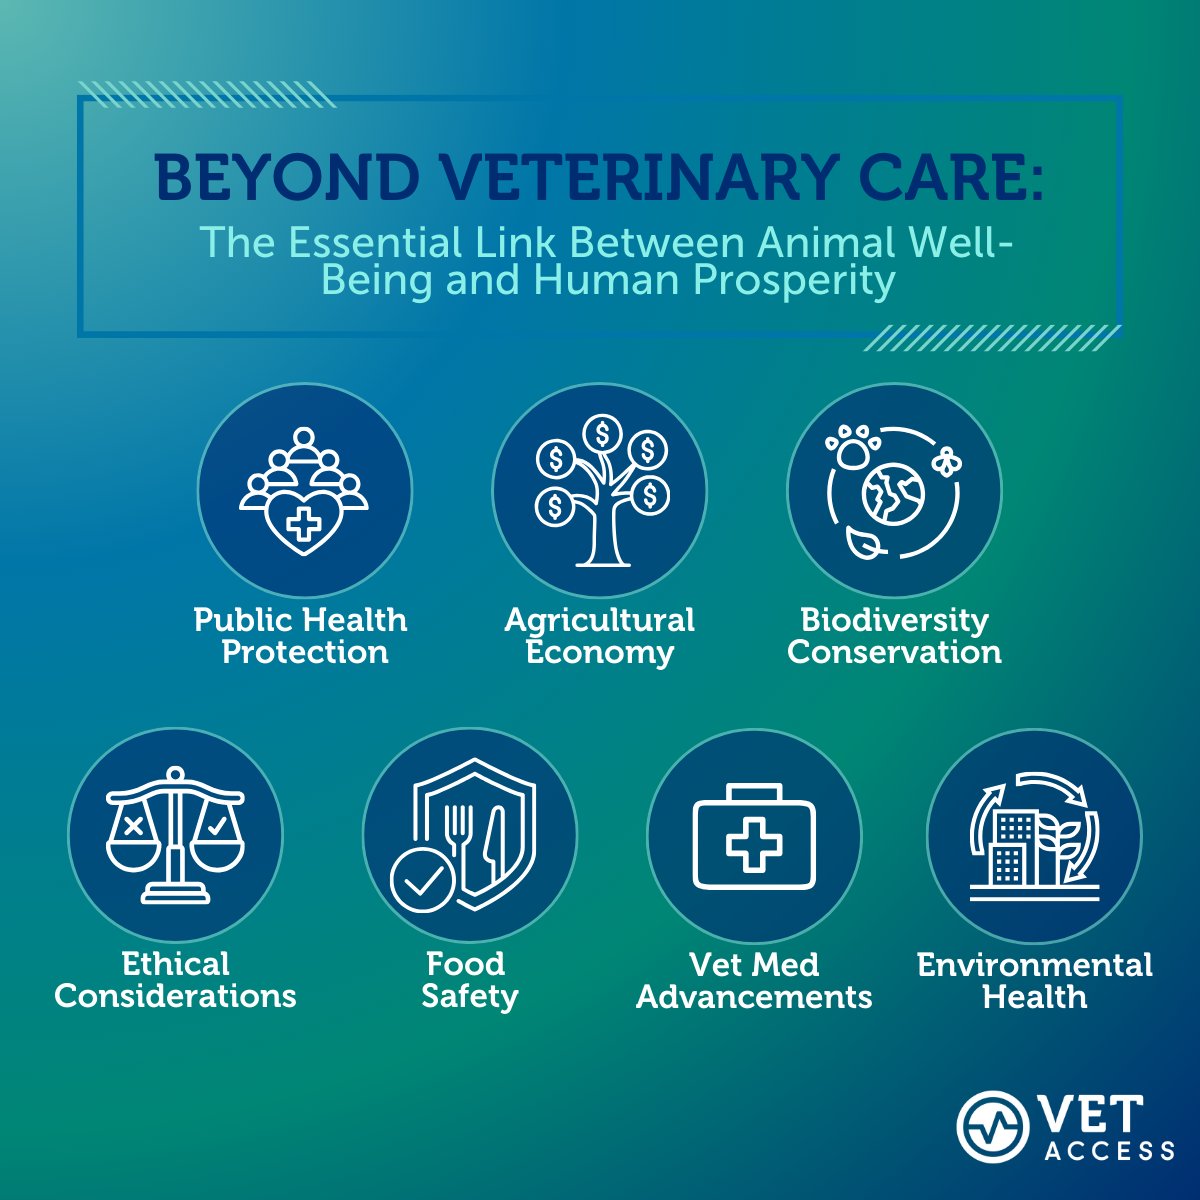 Empowering veterinary science with technical expertise and community collaboration. Our team leverages deep data insights to drive informed decisions united by empathy to address the complex needs of the veterinary field.

#vetaccess #animalhealth #innovation